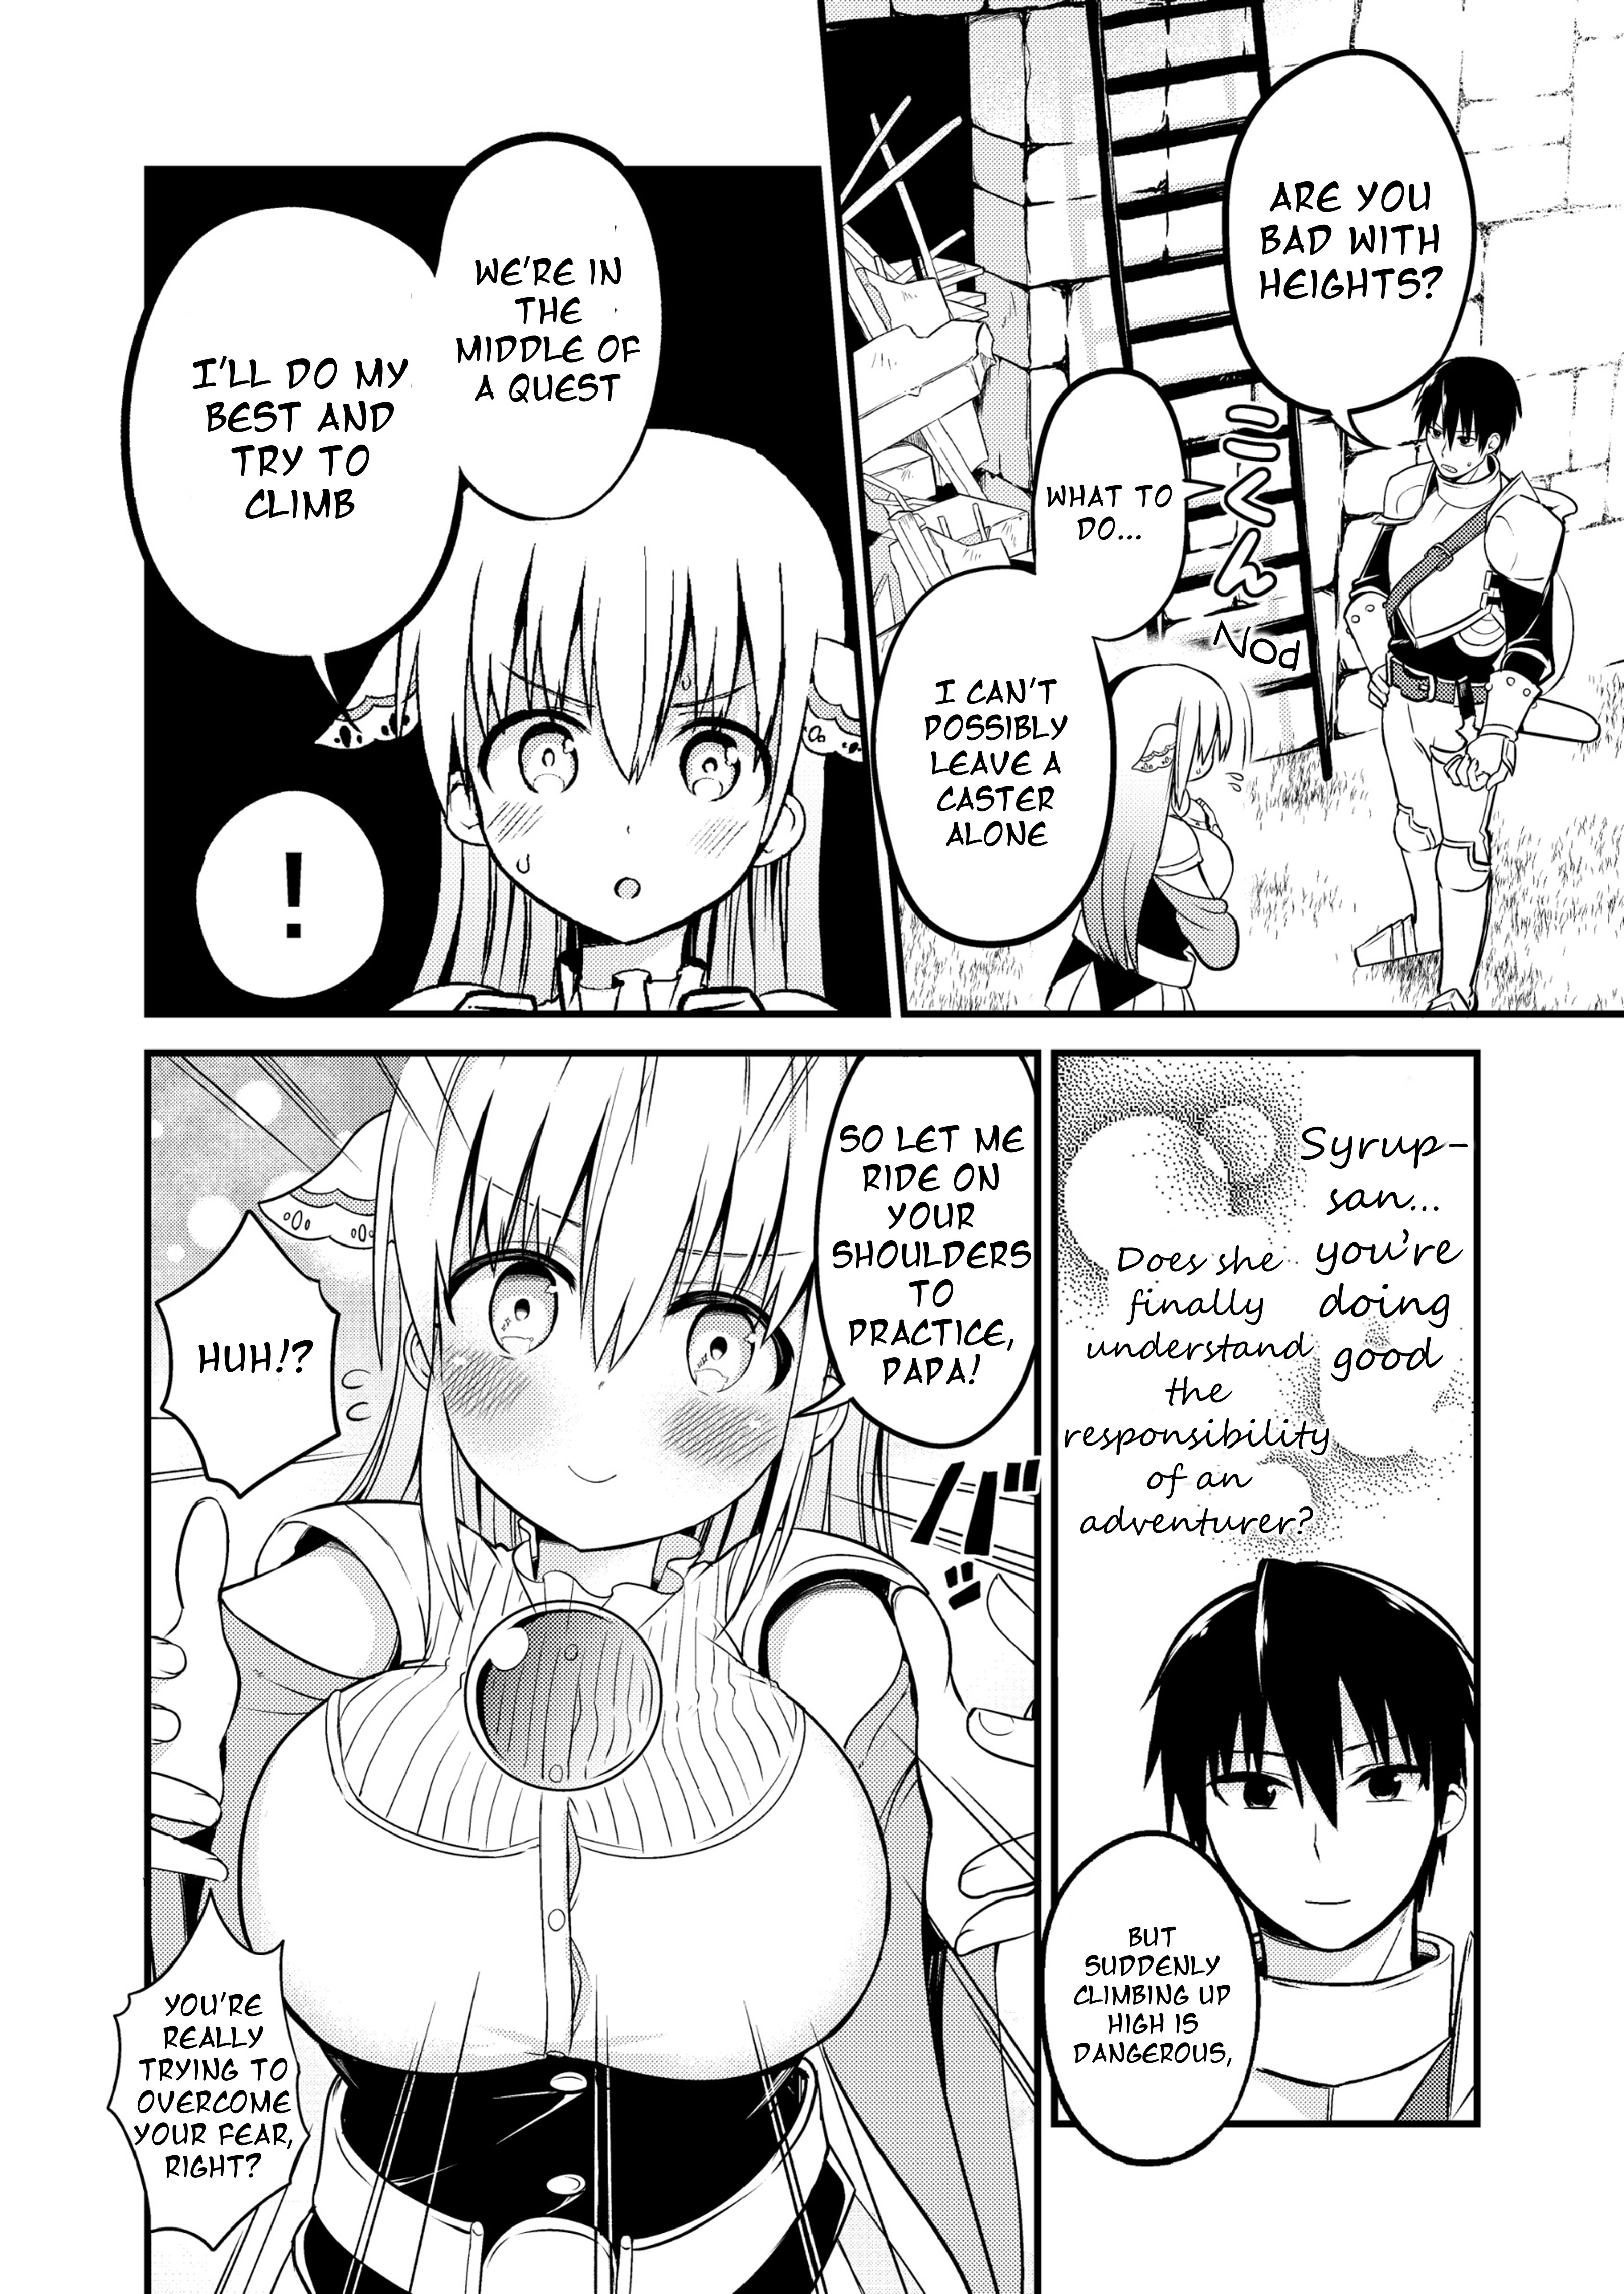 Shiro Madoushi Syrup-San Vol.1 Chapter 18: White Mage Syrup-San Overcoming Her Fear - Picture 2